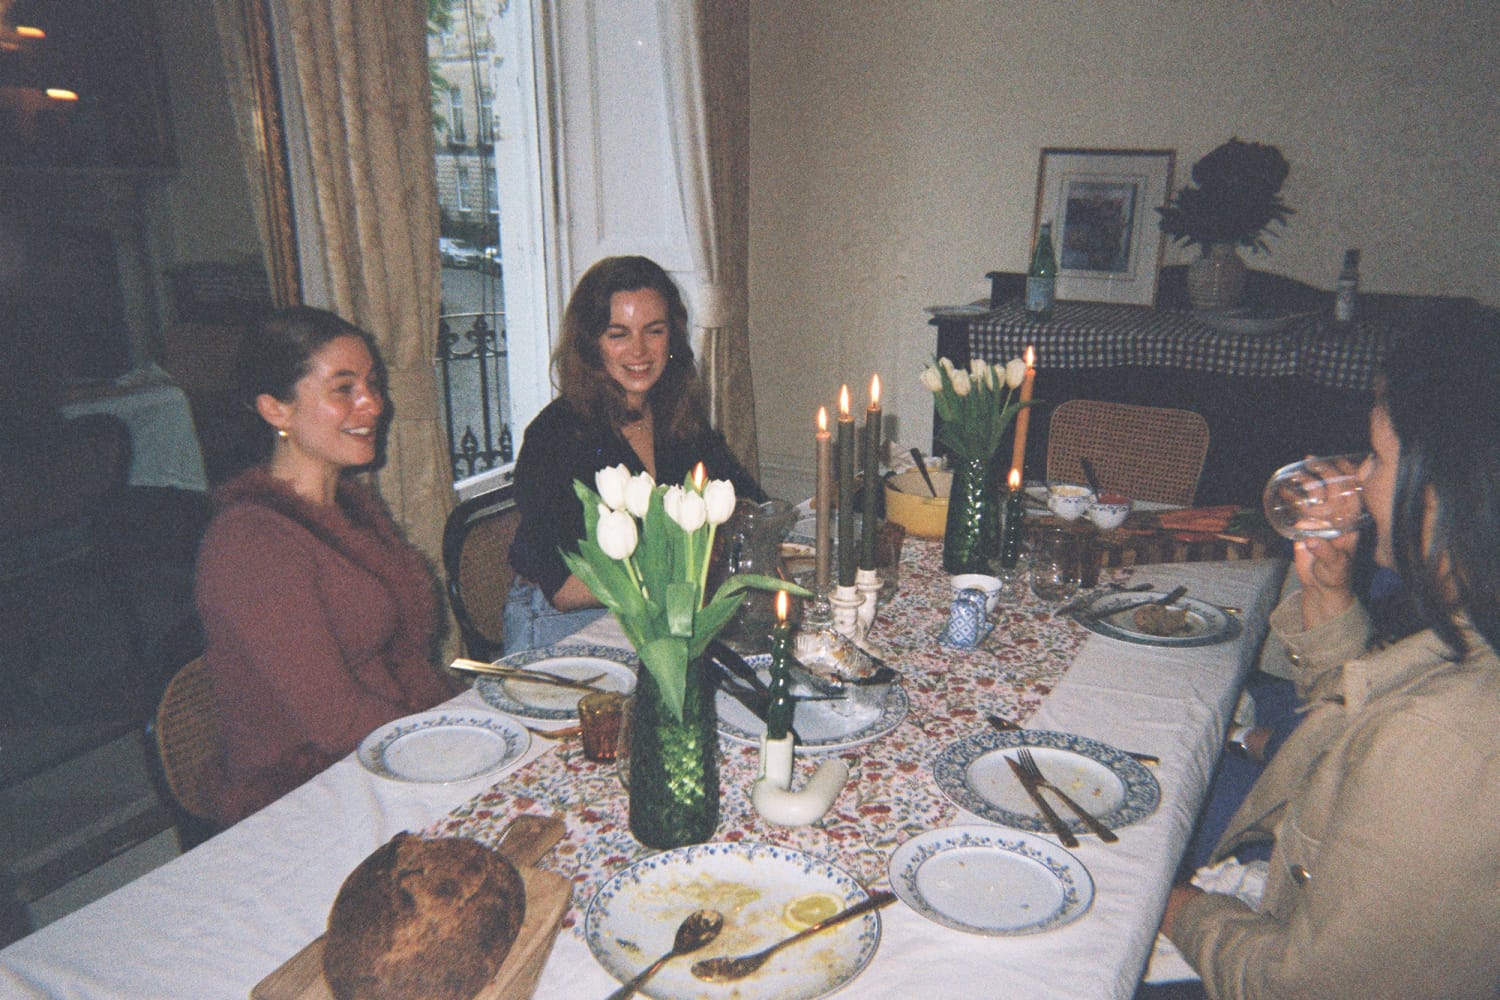 I Wanted to Make Friends in a New City — So I Hosted 5 Strangers for Dinner